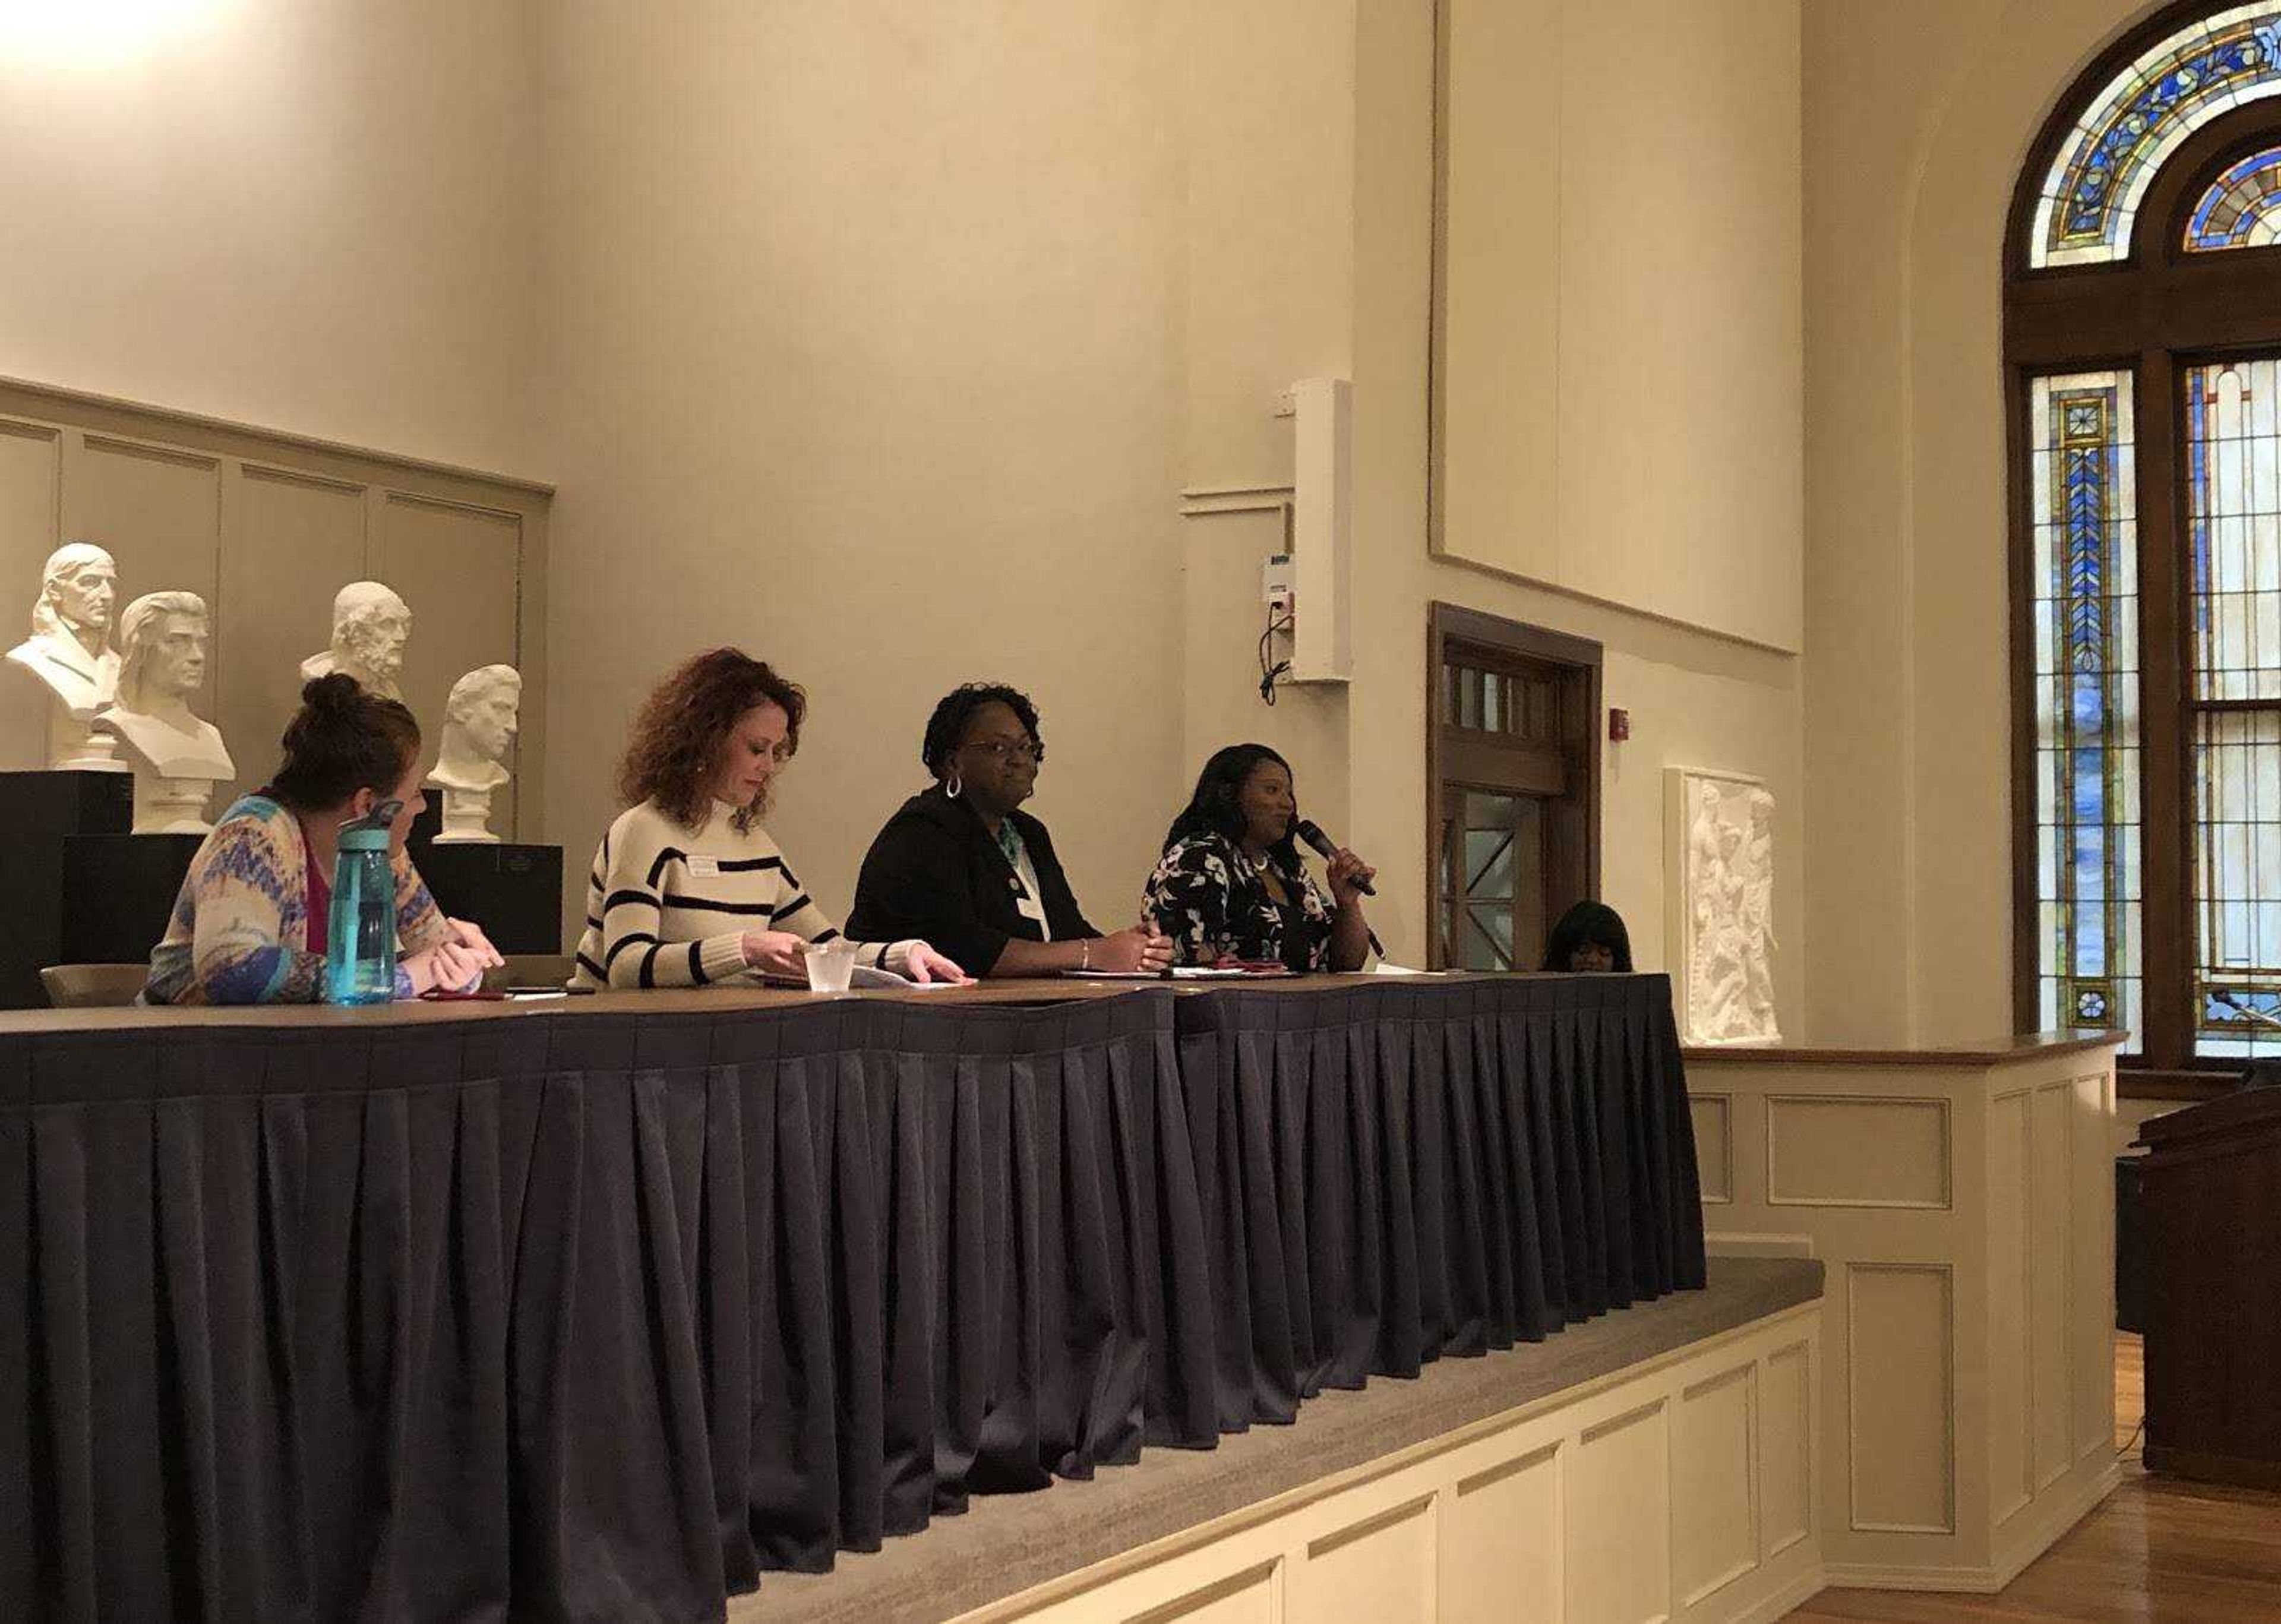 Panelists Sally Spalding, Erin Fluegge, Sonia Rucker, and Soni Lloyd (right to left) speak on pressing issues in the workplace.